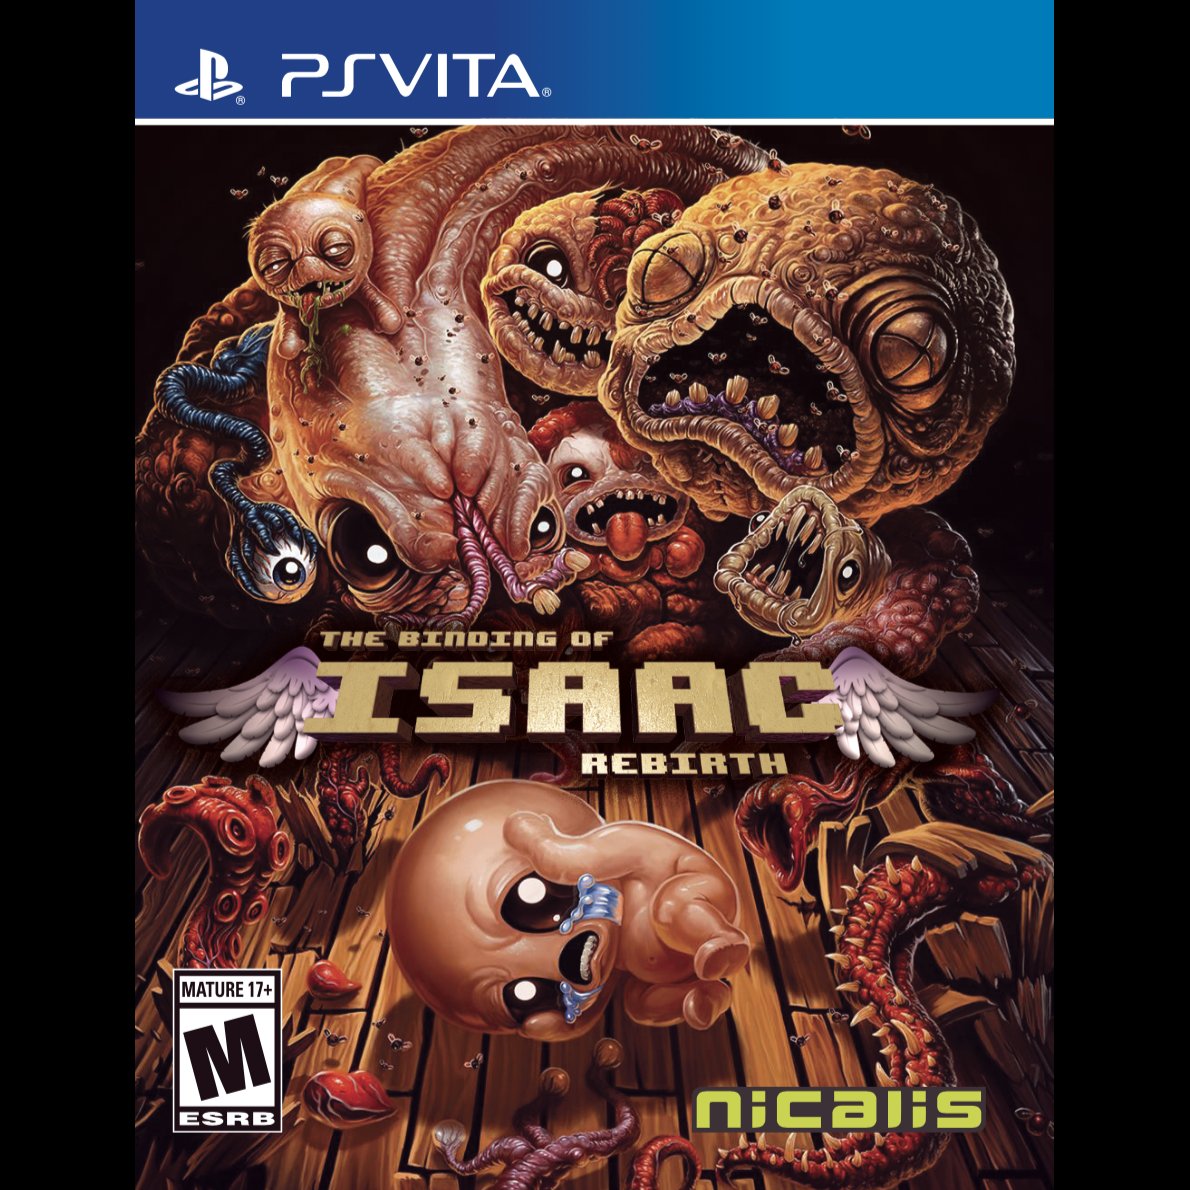 The Binding of Isaac rebirth physical